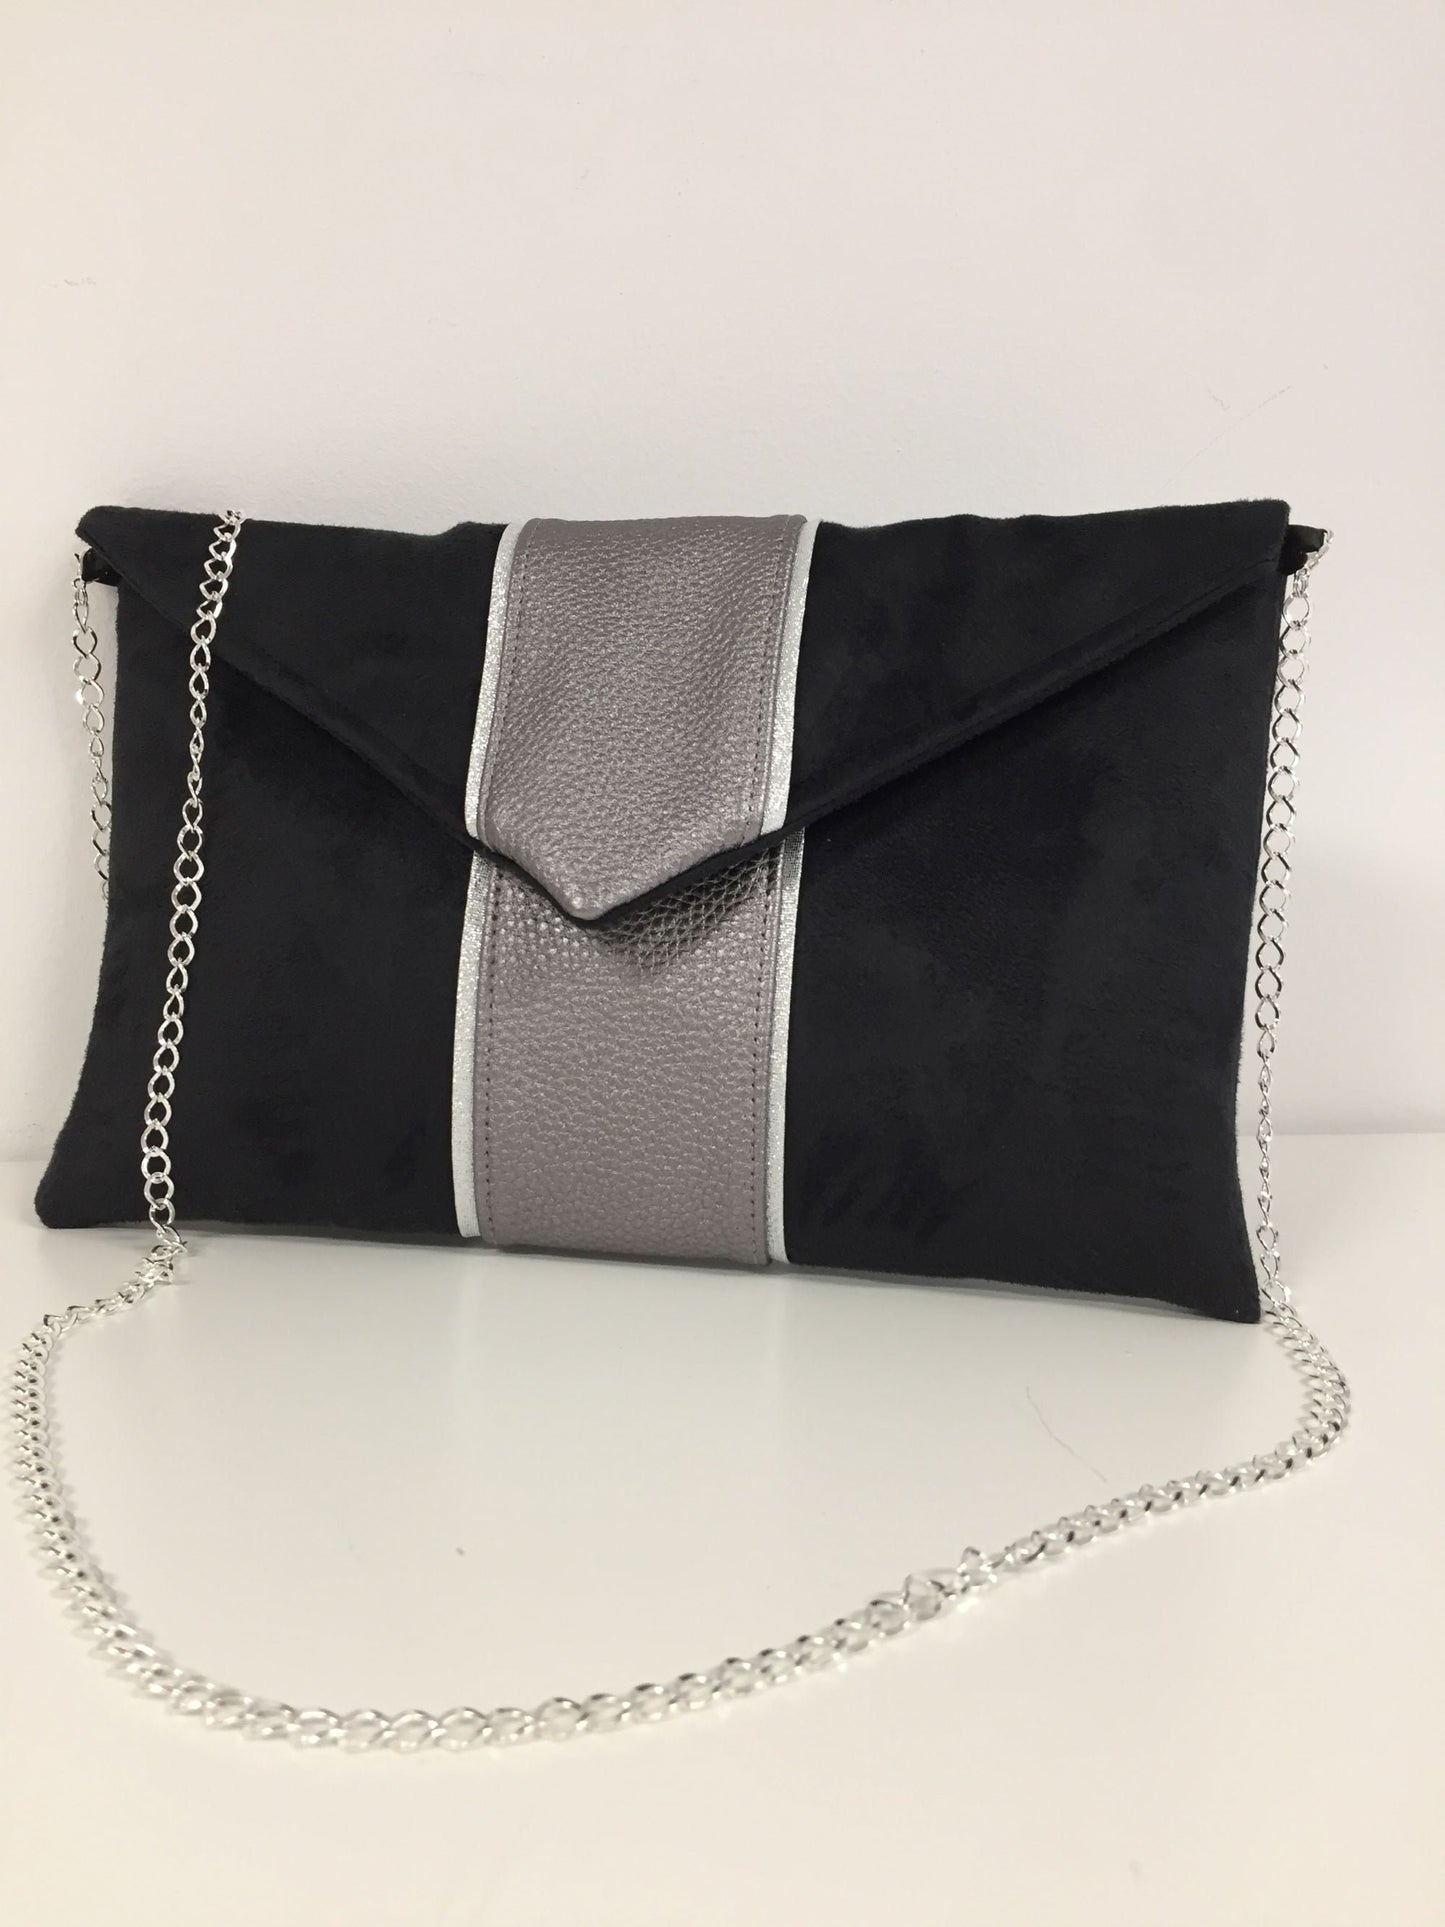 Black and iridescent gray Isa clutch bag with silver trim